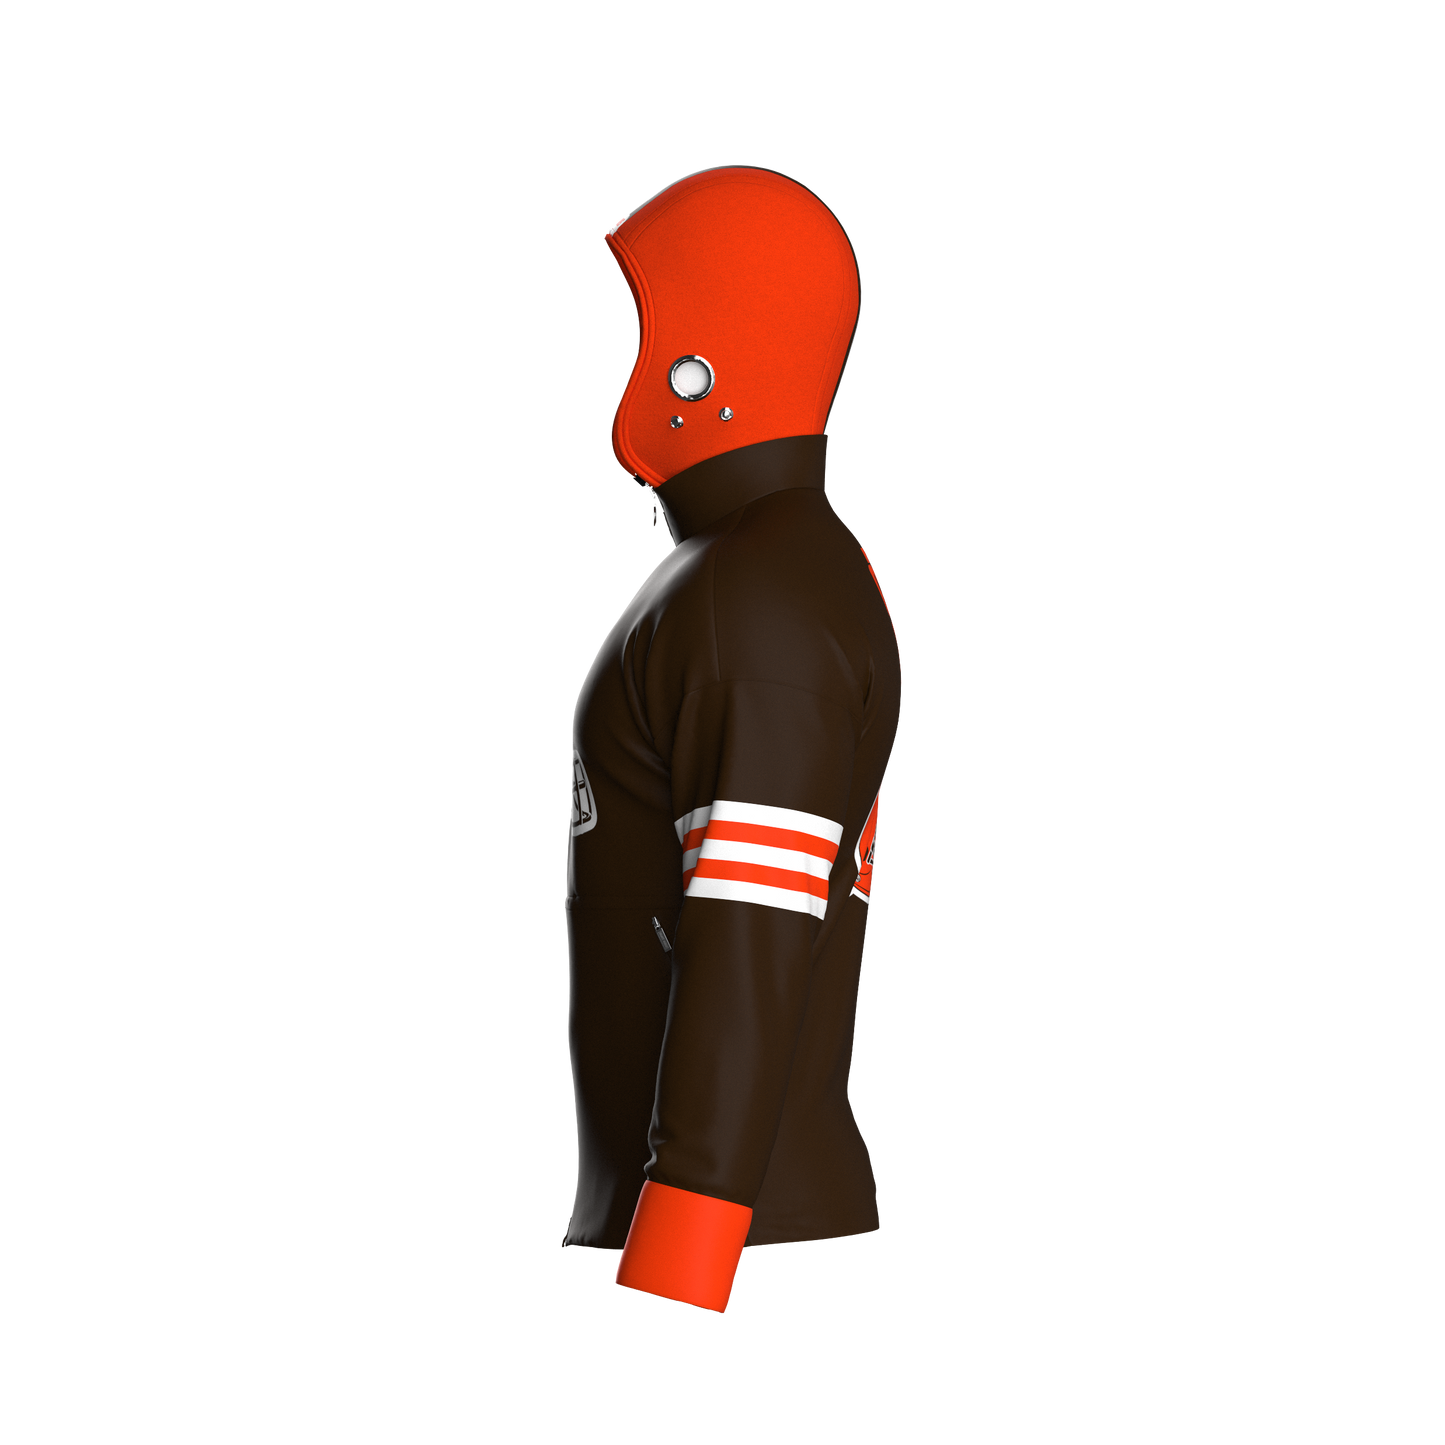 Cleveland Browns Home Zip-Up (youth)